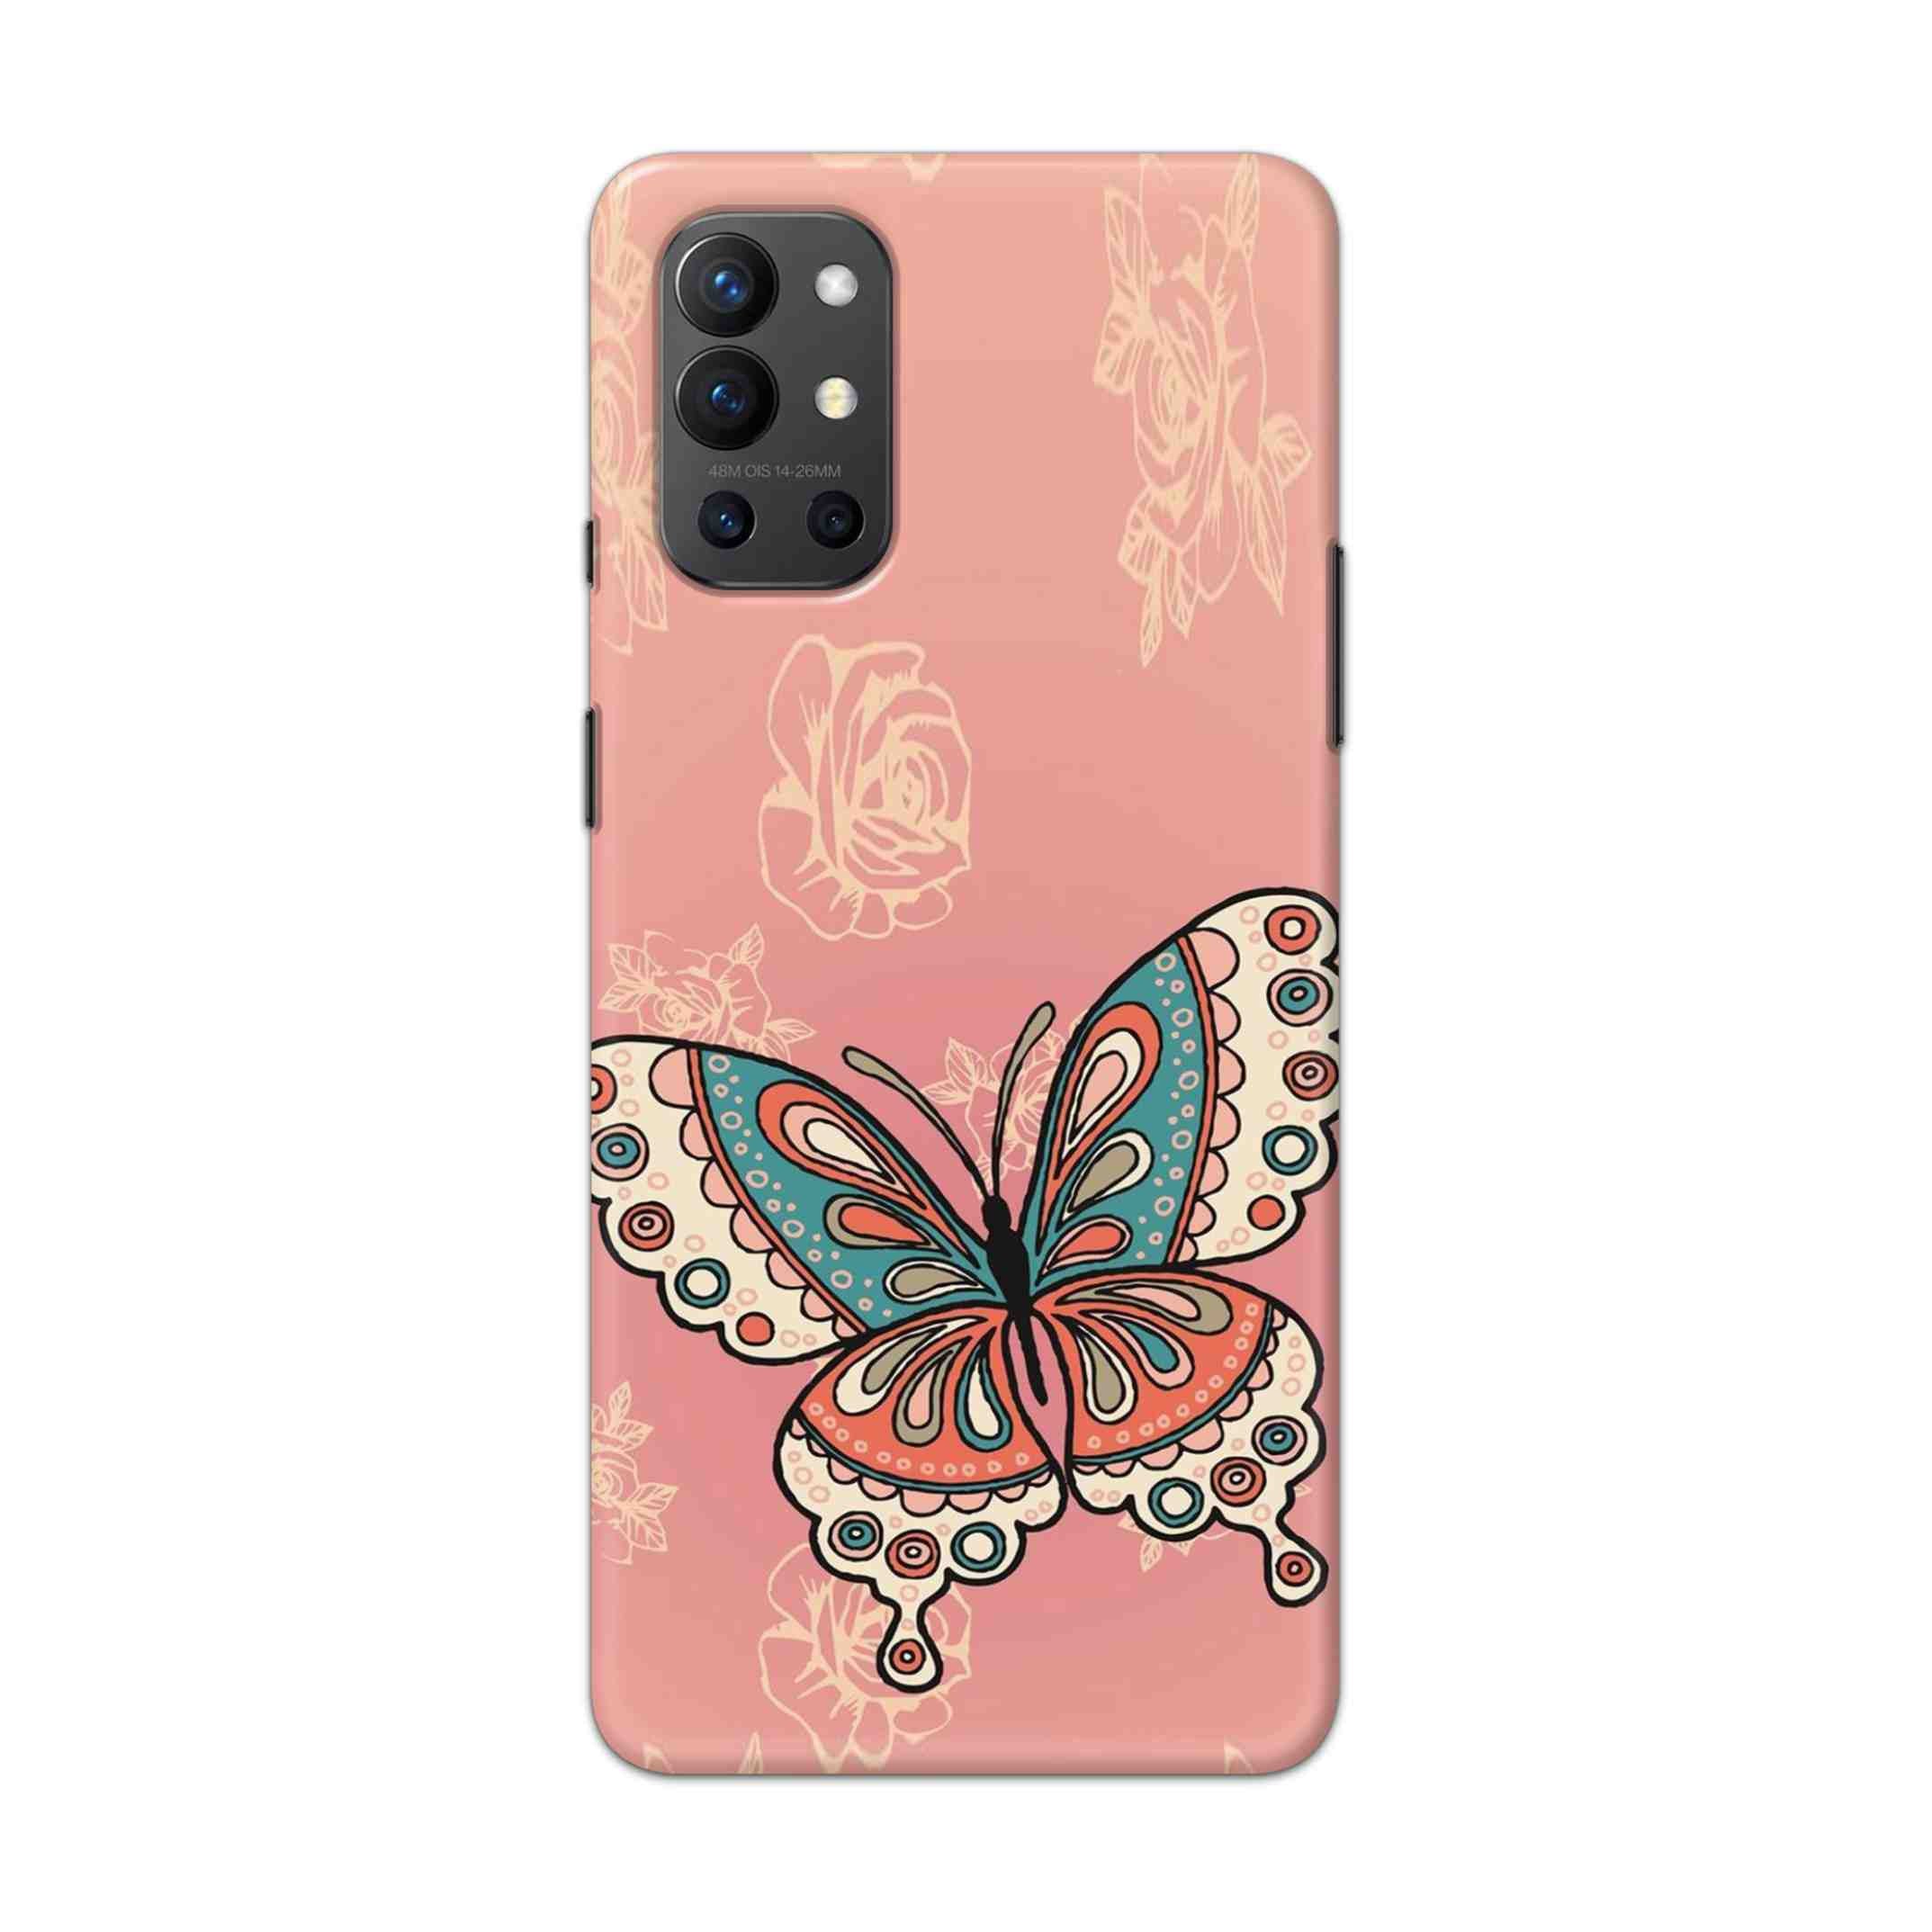 Buy Butterfly Hard Back Mobile Phone Case Cover For OnePlus 9R / 8T Online